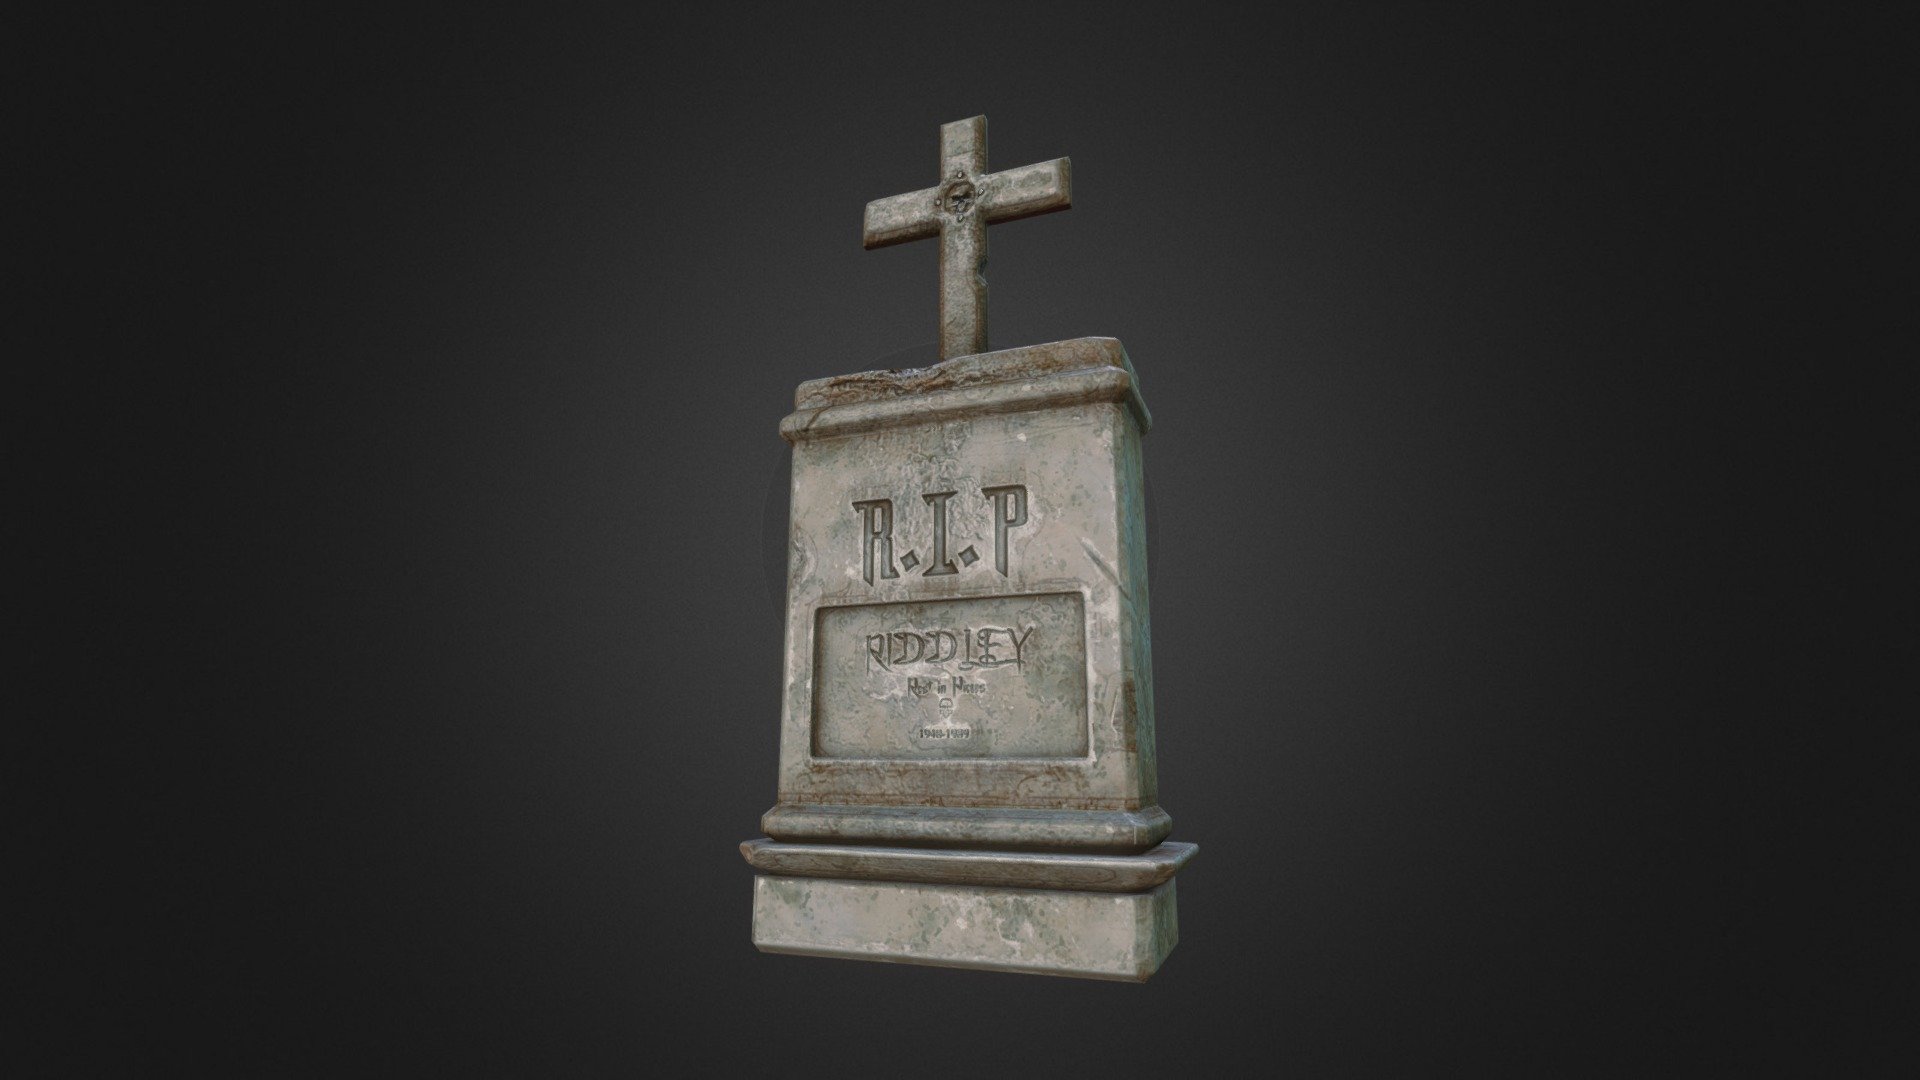 A fantasy tombstone from one of my projects. 
Visit blog.meltinglogic.com for more.

This model was used to illustrate the pipeline of a game asset for my article on CGMasters.
http://www.cgmasters.net/free-tutorials/what-to-know-when-creating-next-gen-assets/ - Riddley's Tombstone - 3D model by Guilherme Henrique (@Sepultura) 3d model